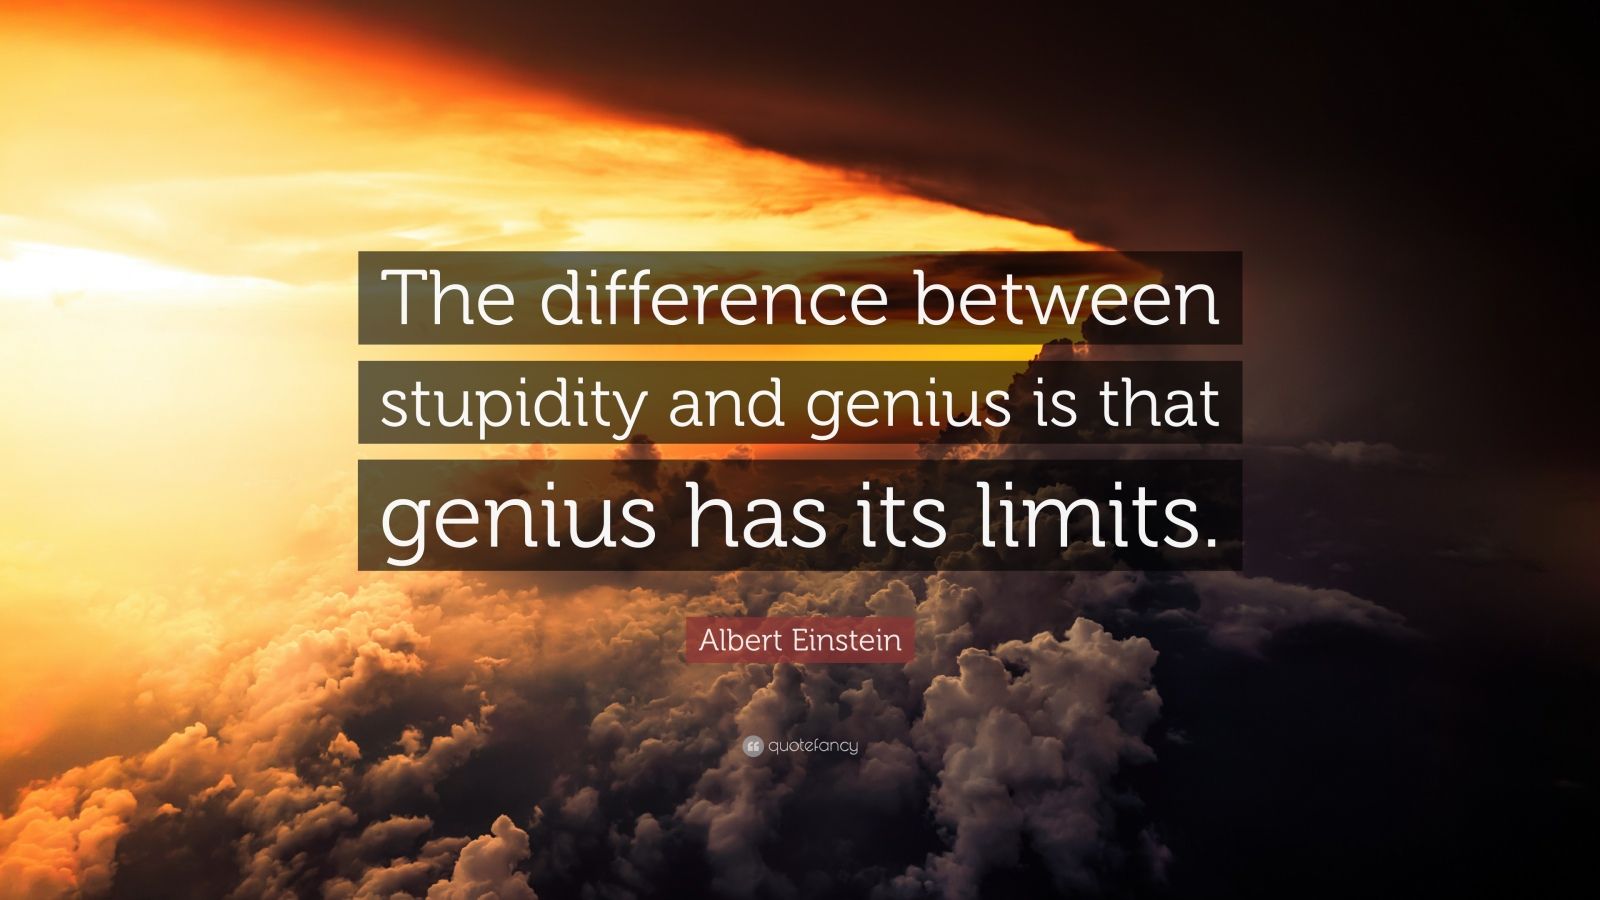 Albert Einstein Quote: "The difference between stupidity ...